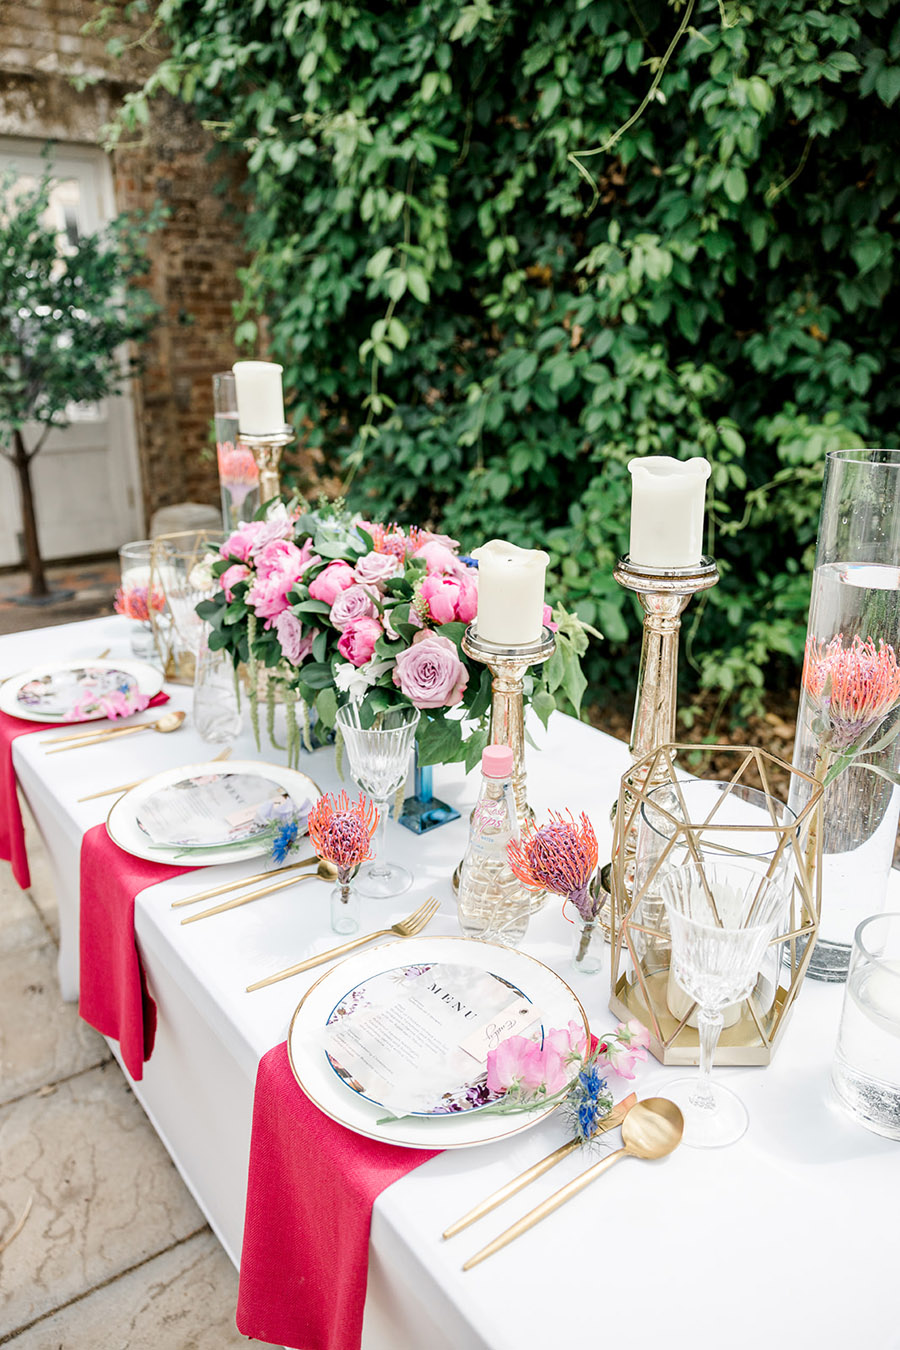 Modern intimate wedding styling inspiration from Slindon House, image credit Kelsie Scully (16)